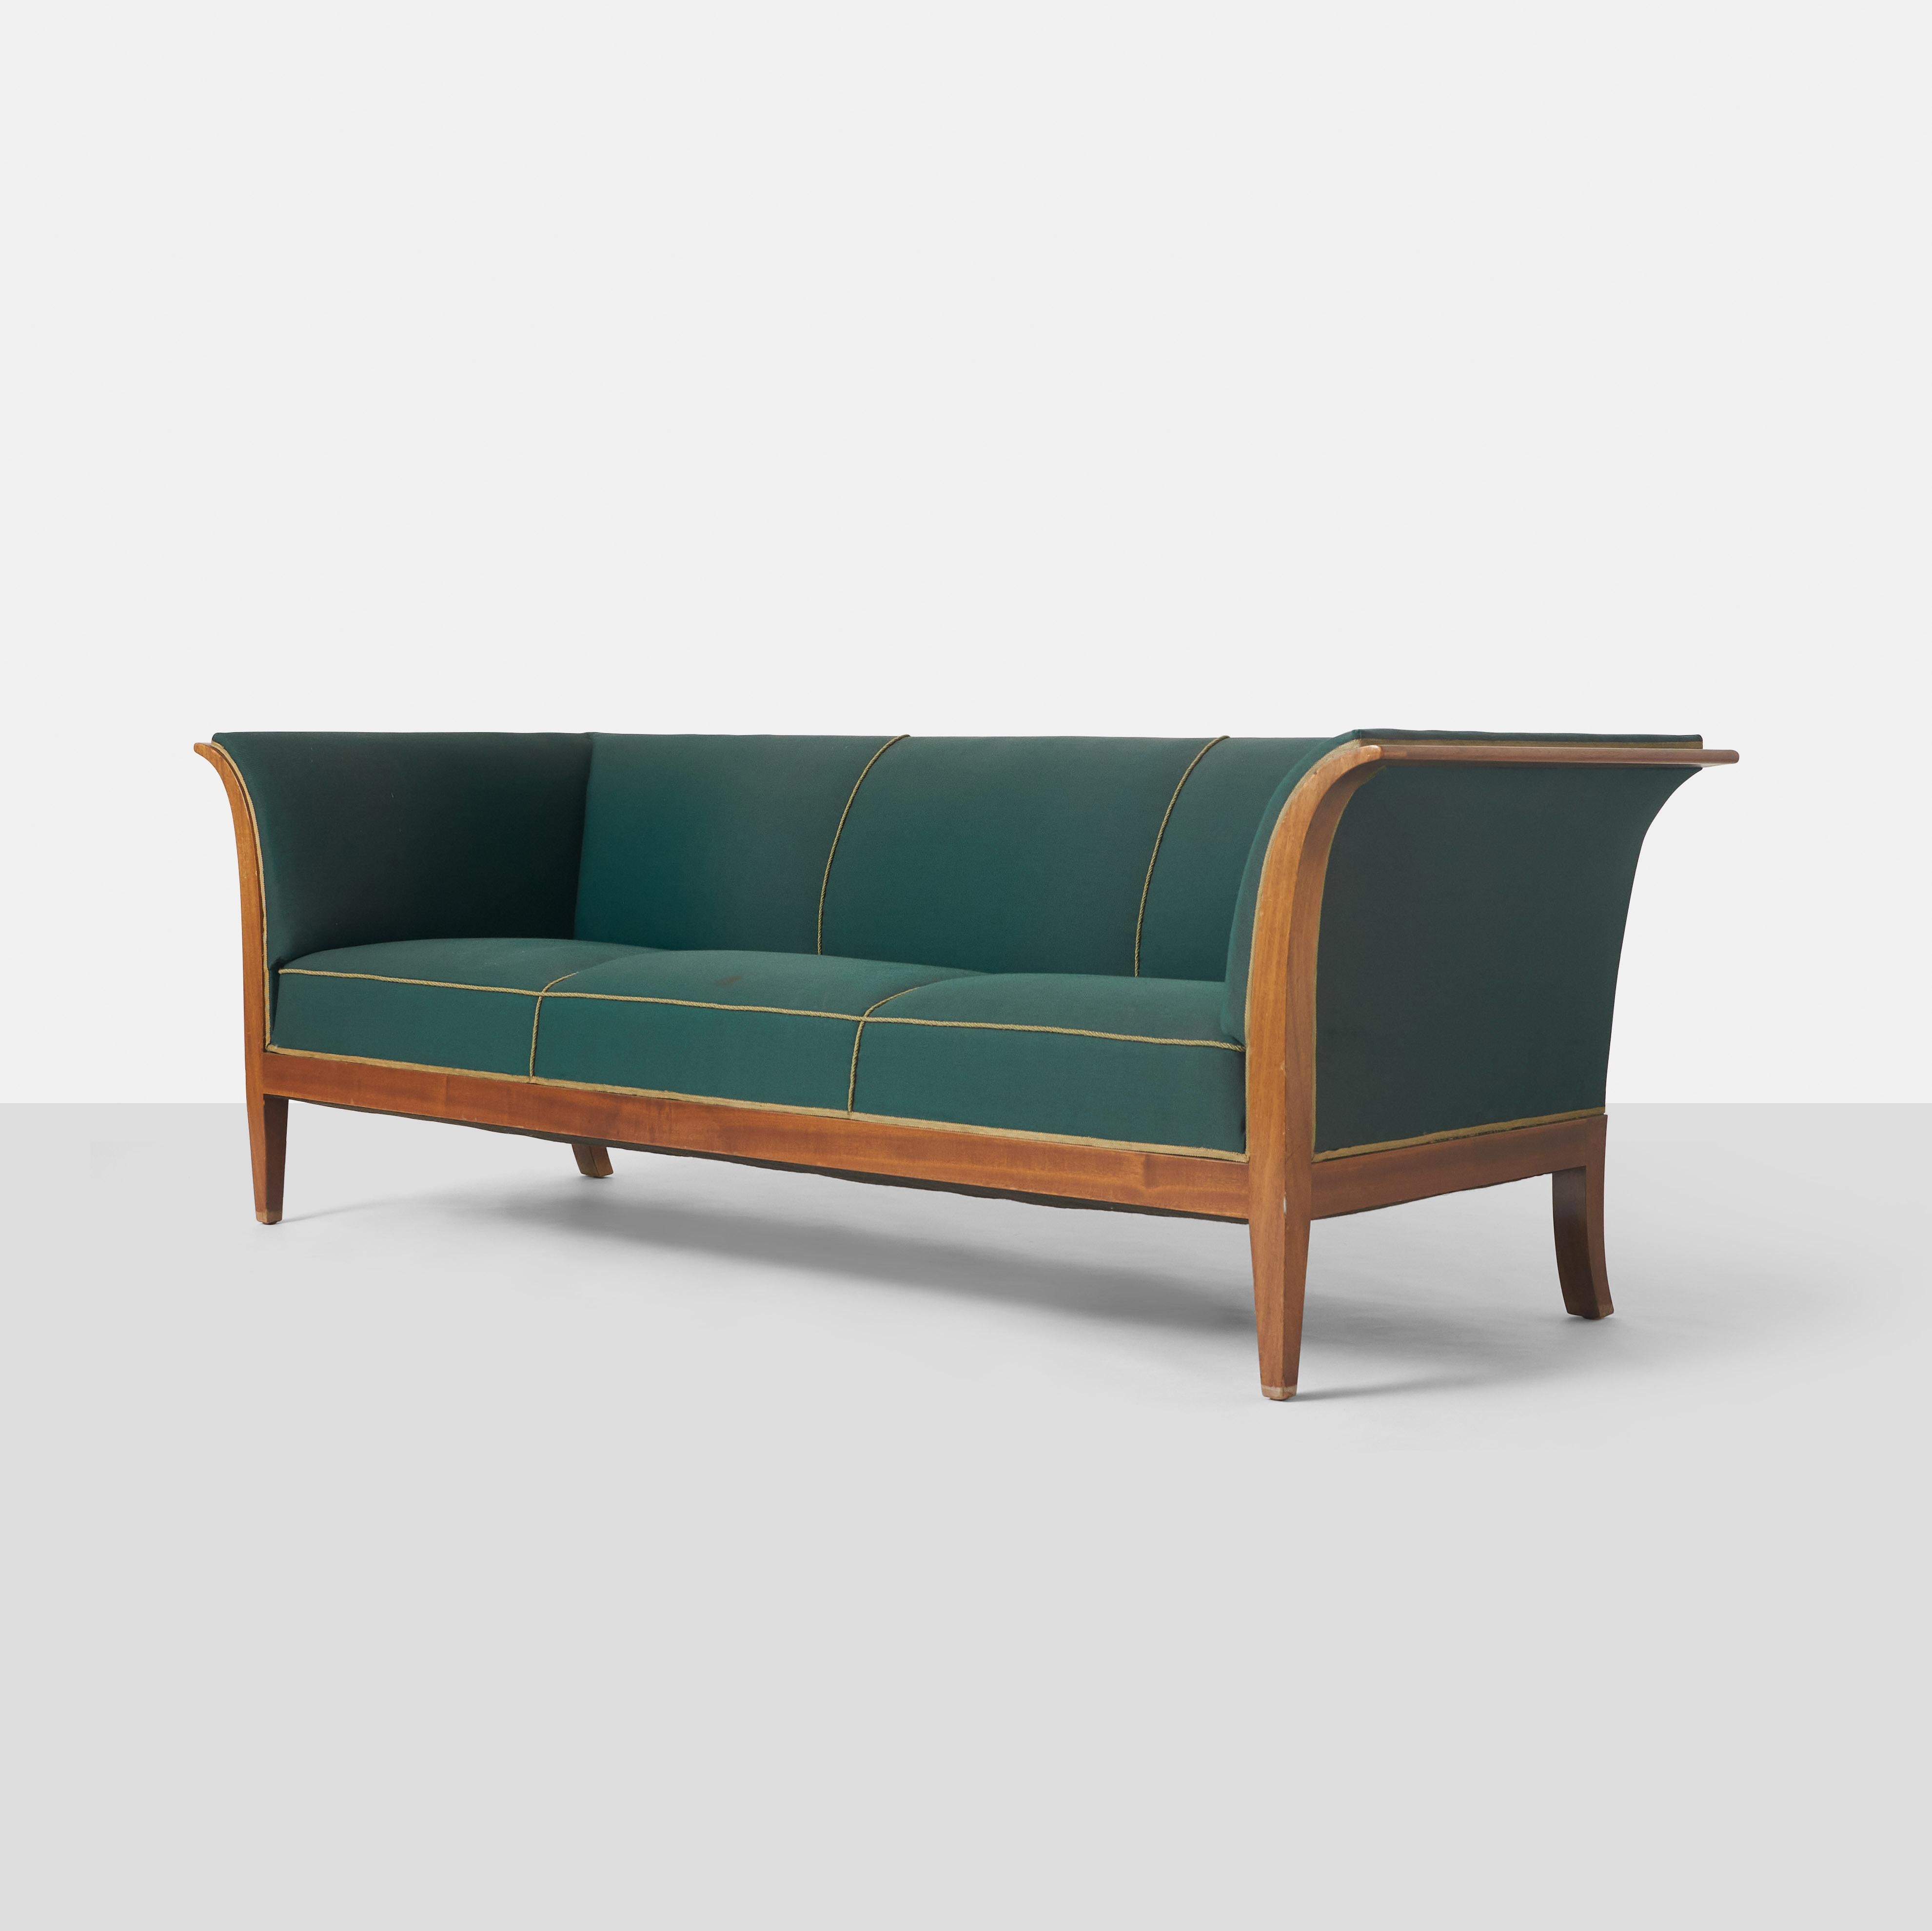 A Frits Henningsen three seater sofa on a mahogany frame with eight legs and covered with green wool. The sides have exposed wood panels on either side. It was designed and made circa 1938 by Danish cabinetmaker Frits Henningsen
